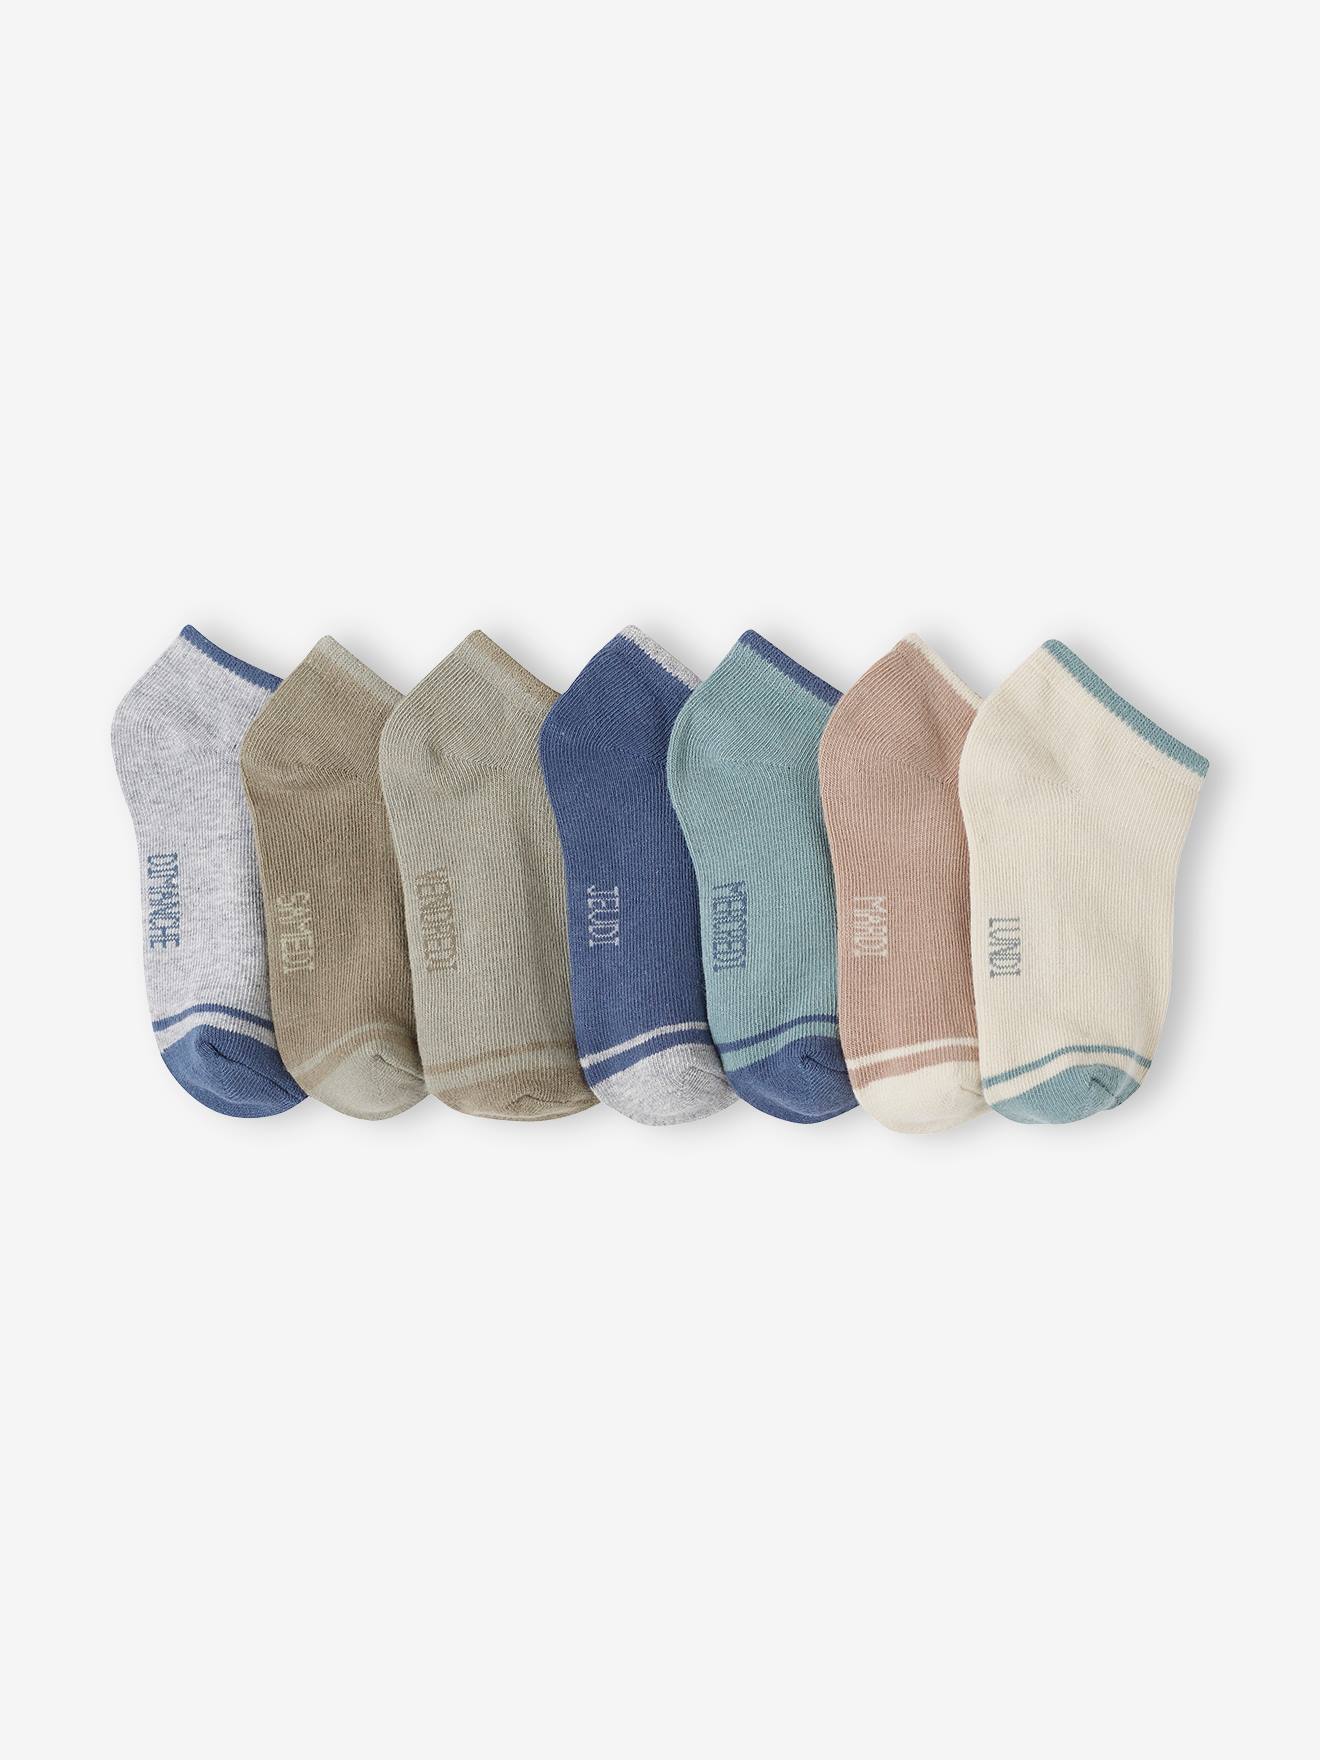 Pack of 7 pairs of Trainer Socks for Boys grey blue